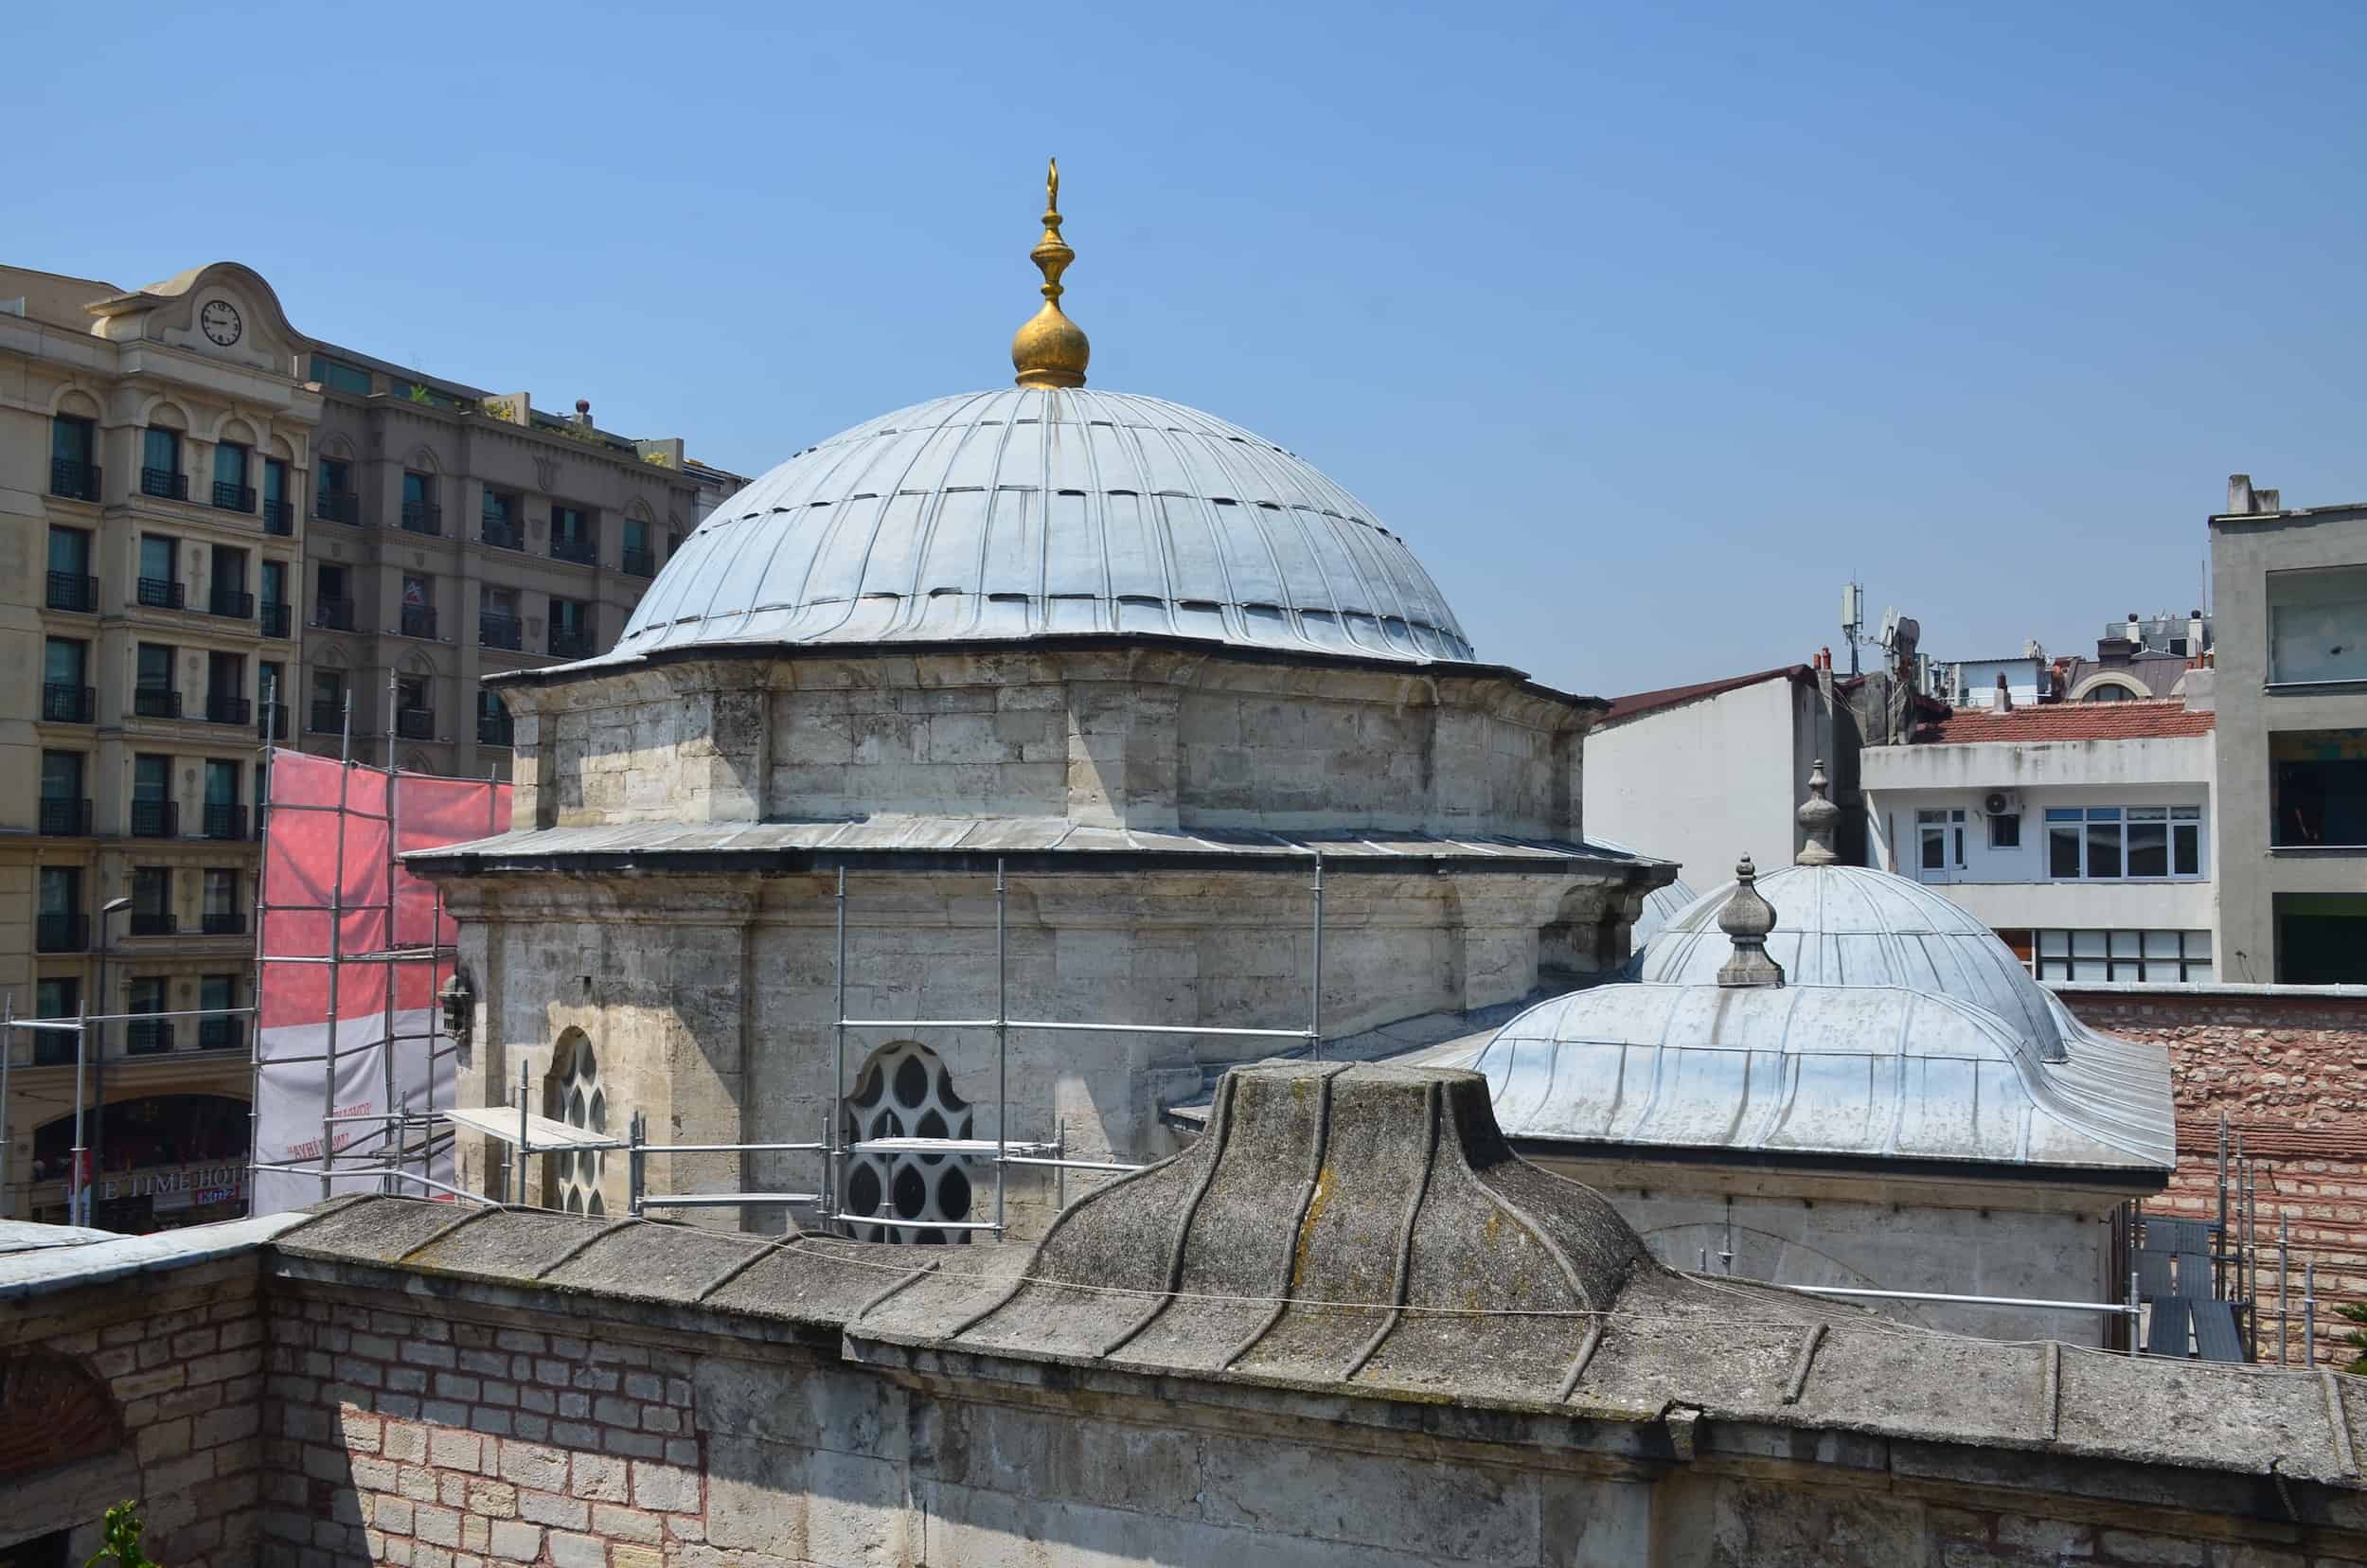 Dome of the Tomb of Mustafa III at the Laleli Mosque, Istanbul, Turkey